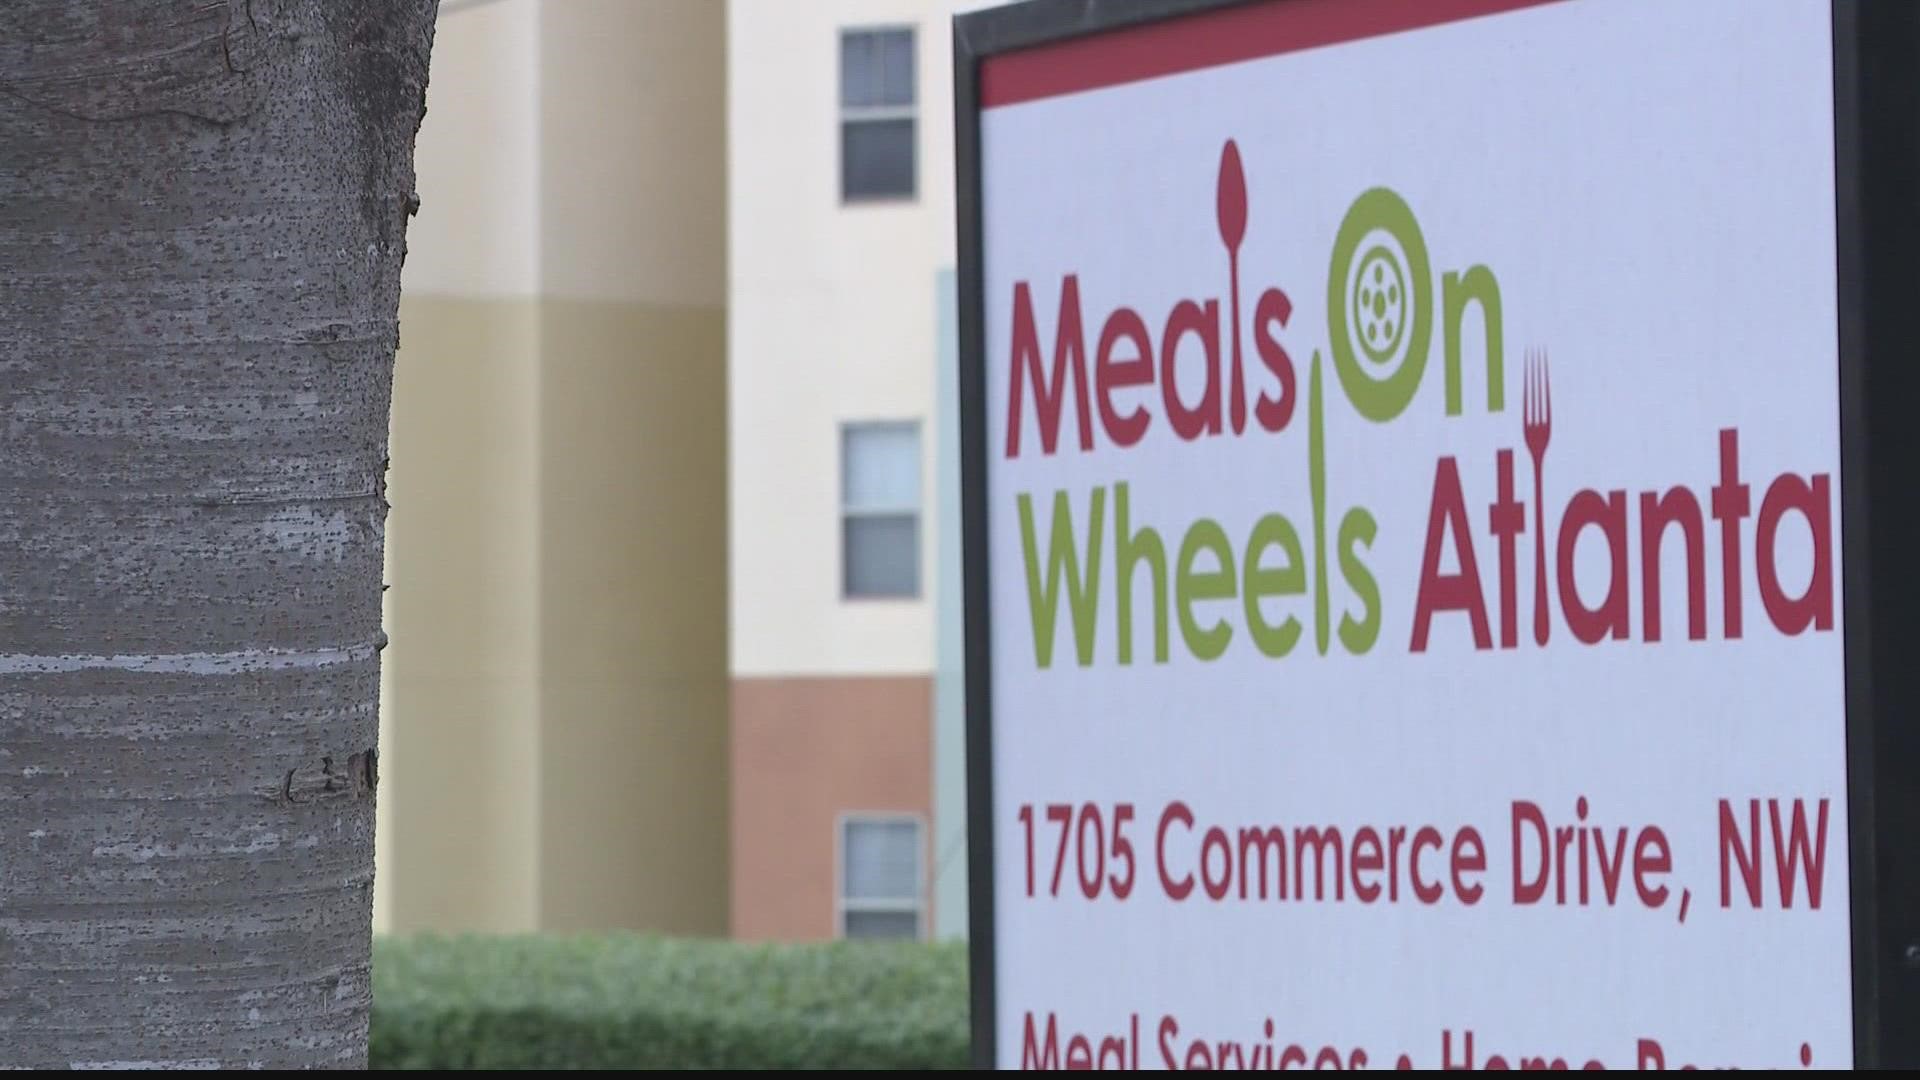 The additional price of gas is putting in jeopardy the number of senior citizens Meals on Wheels is able to help.